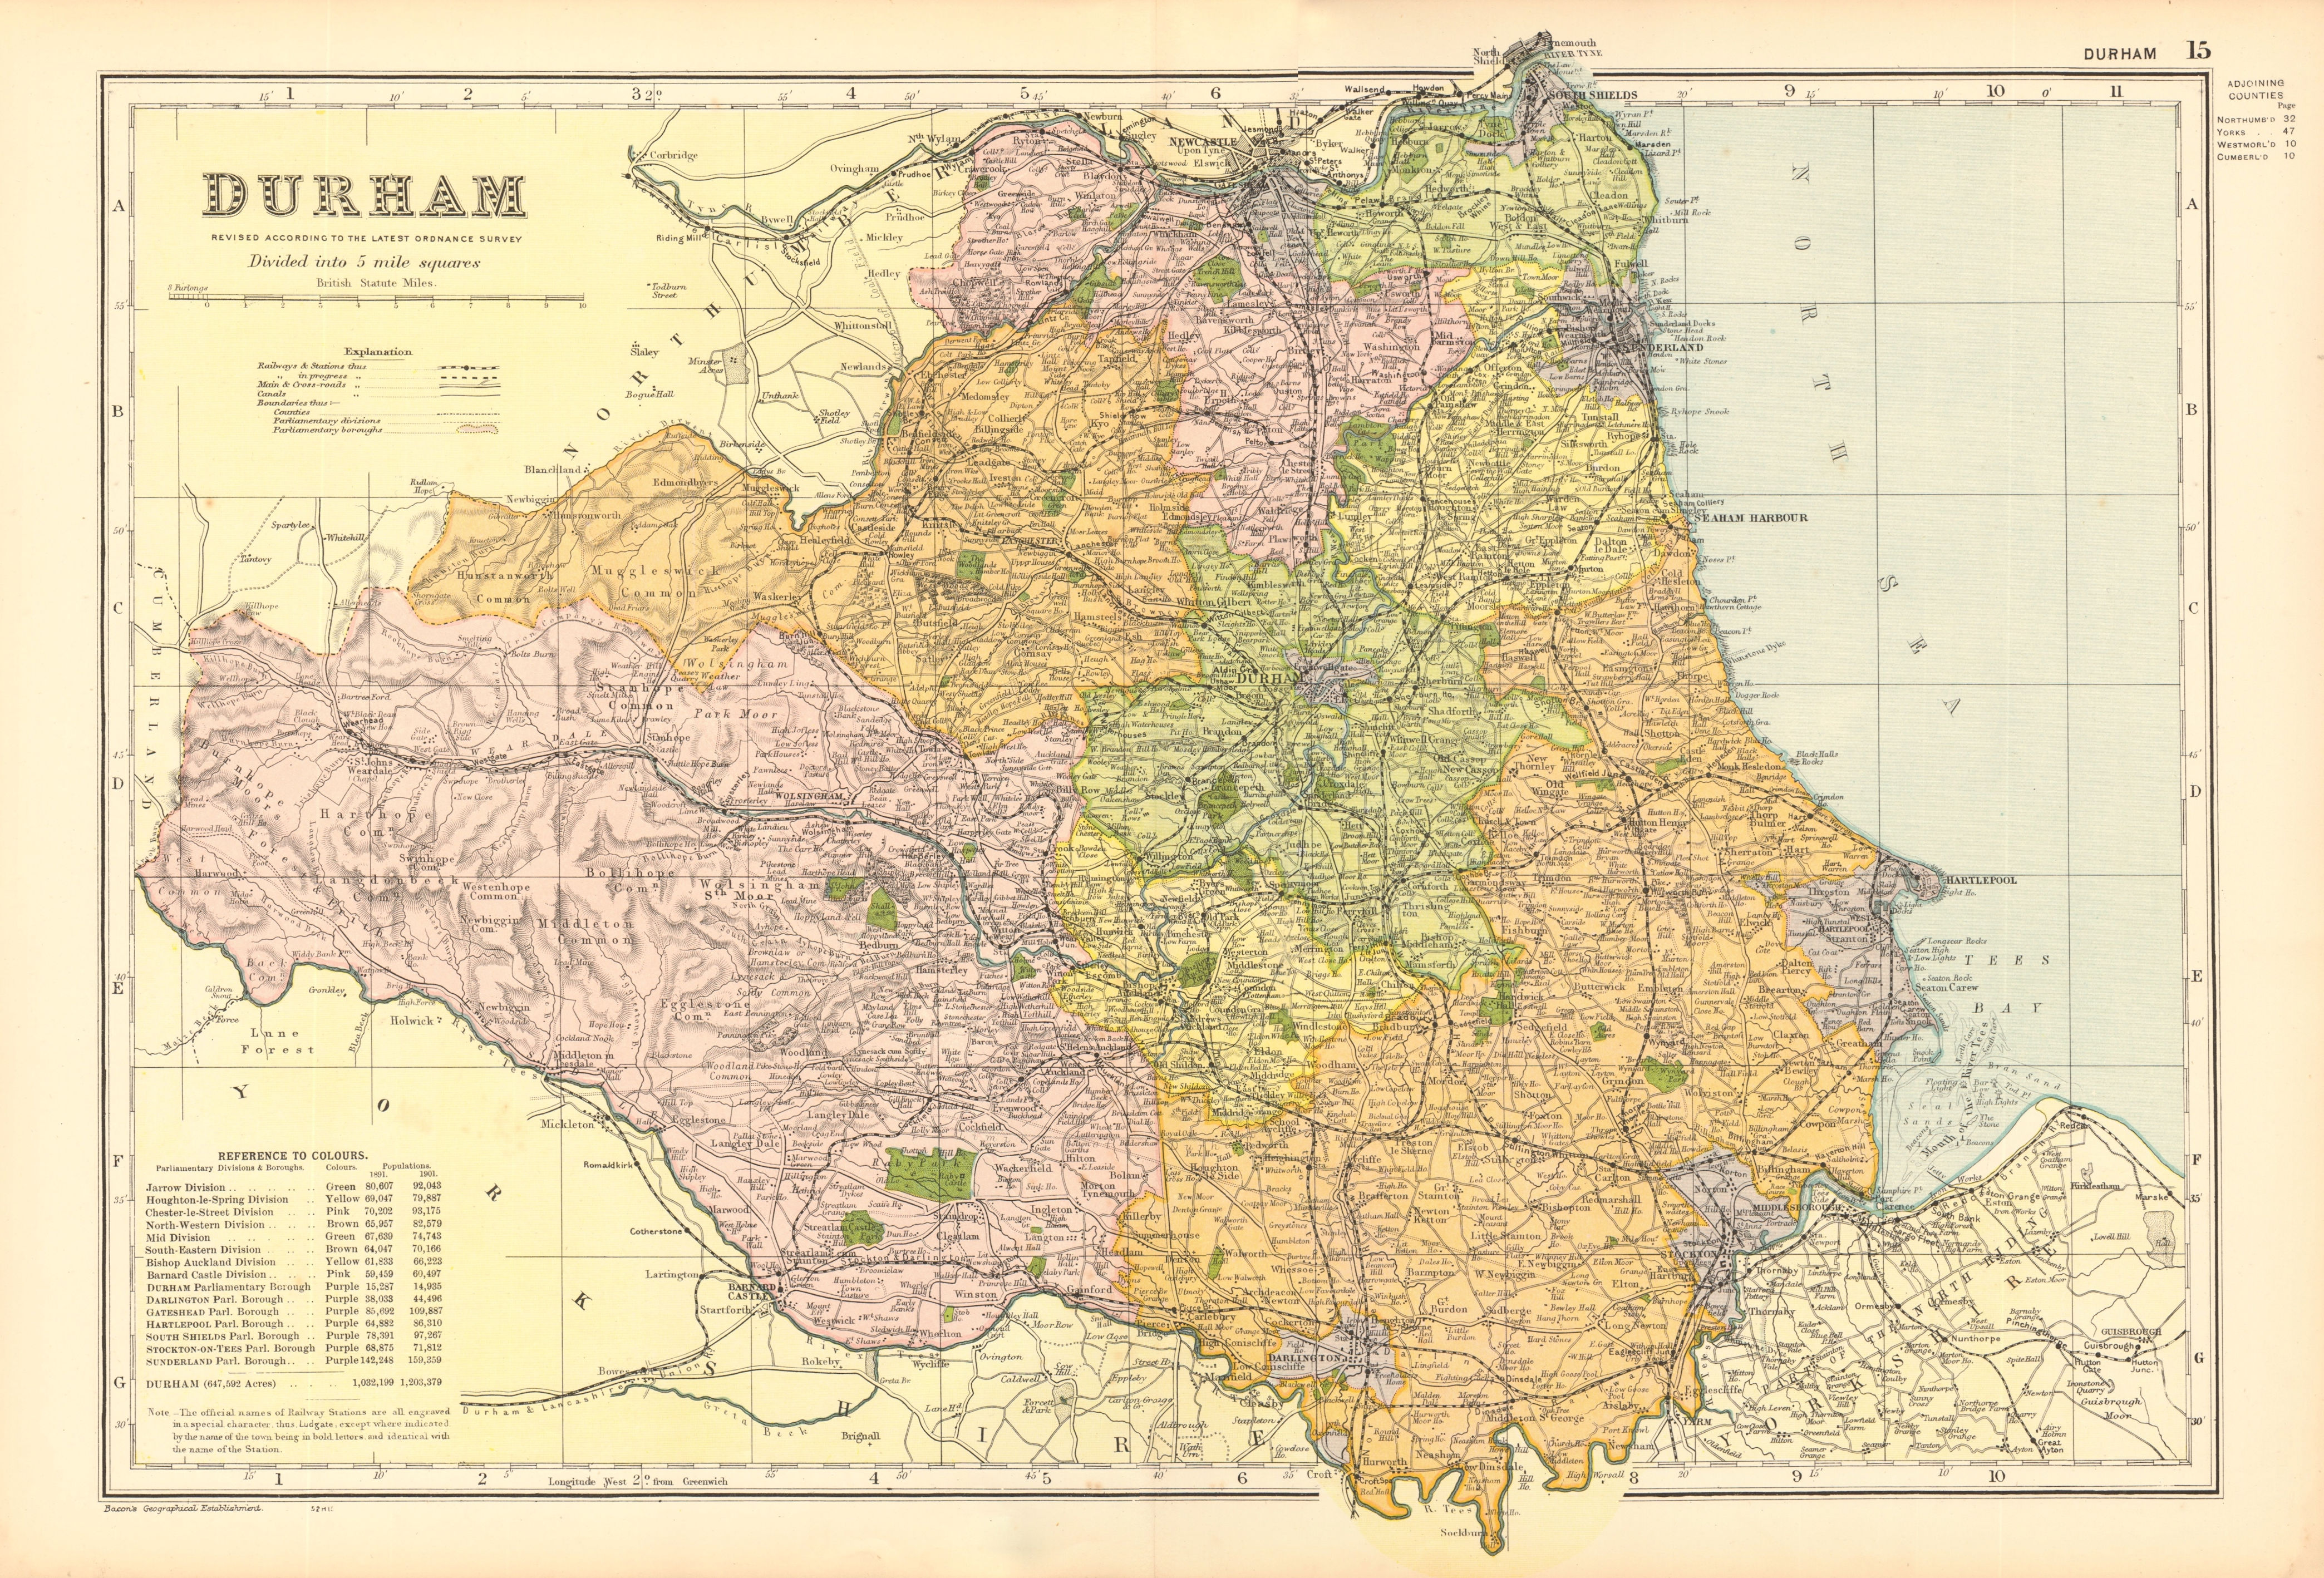 Associate Product DURHAM. Showing Parliamentary divisions, boroughs & parks. BACON 1904 old map